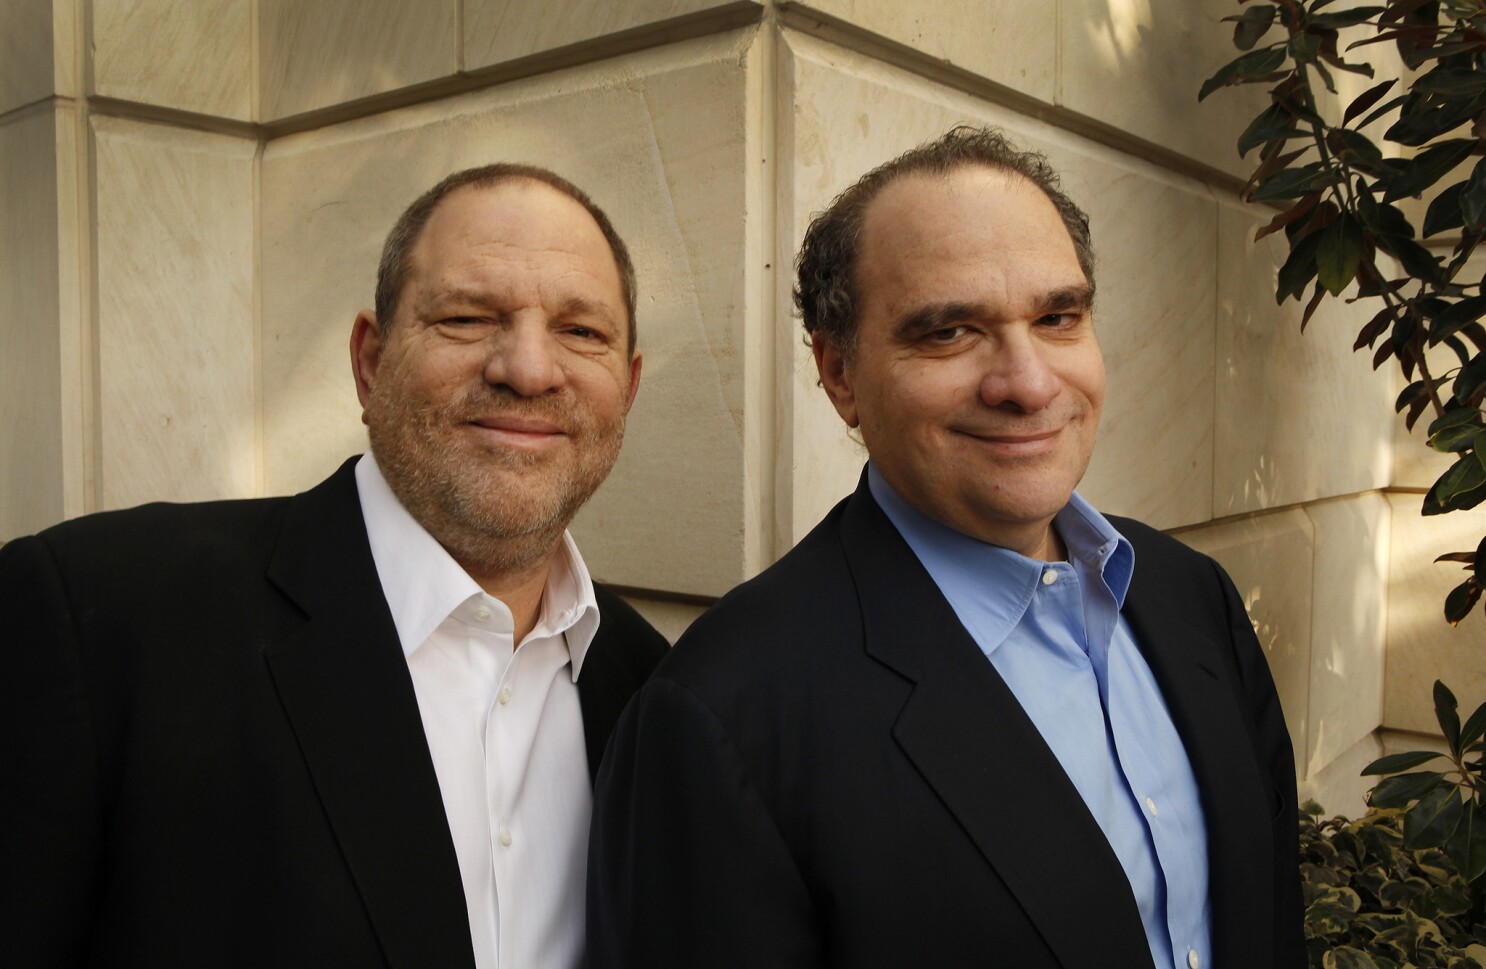 Should The Brother And Partner Of Harvey Weinstein Get A Second Act Los Angeles Times